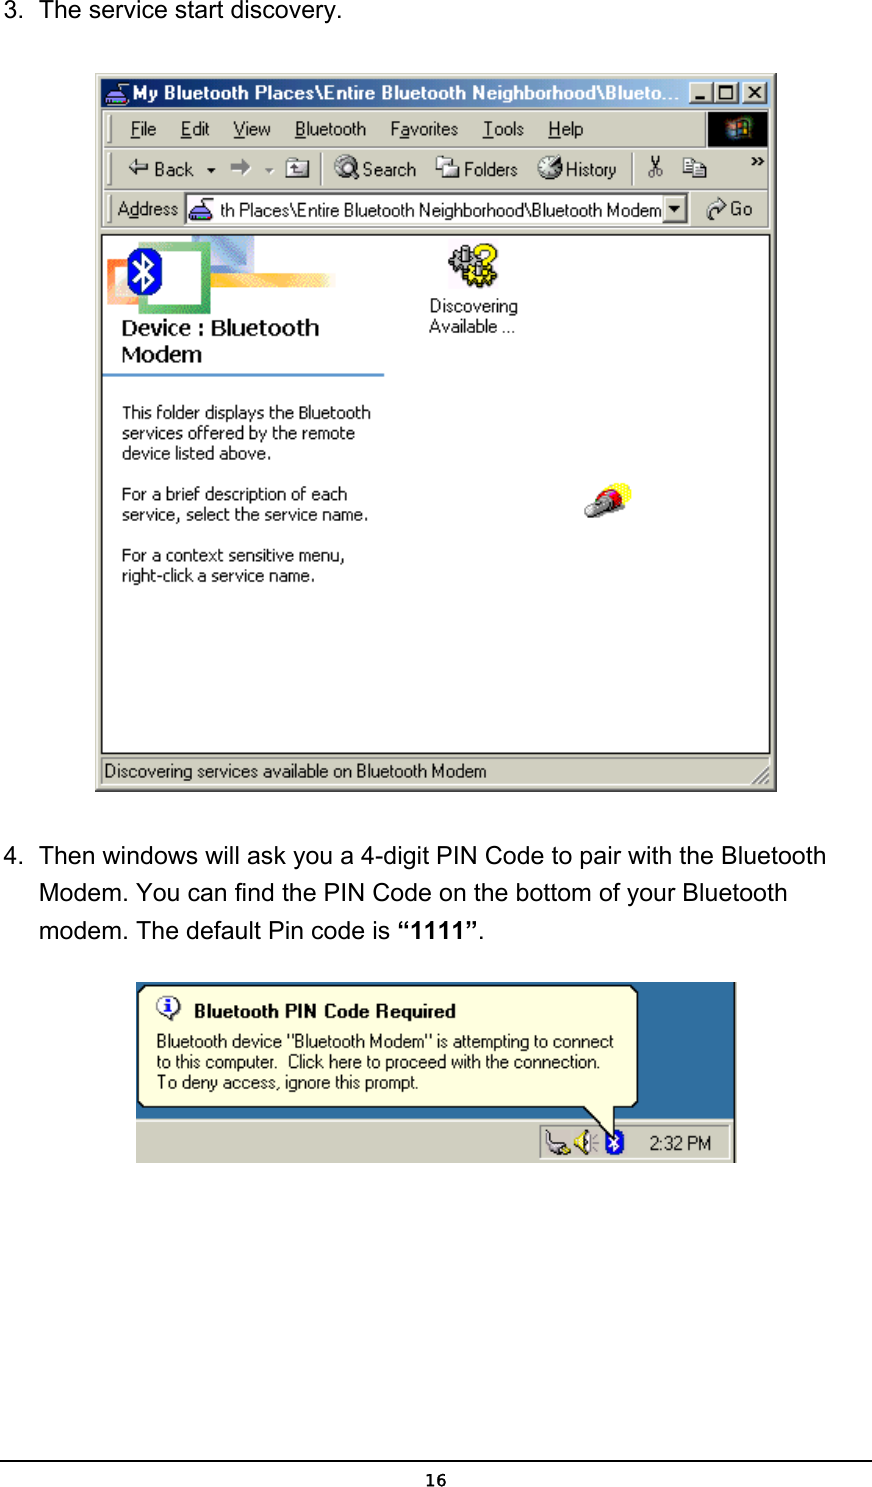   163.  The service start discovery.  4.  Then windows will ask you a 4-digit PIN Code to pair with the Bluetooth Modem. You can find the PIN Code on the bottom of your Bluetooth modem. The default Pin code is “1111”.  